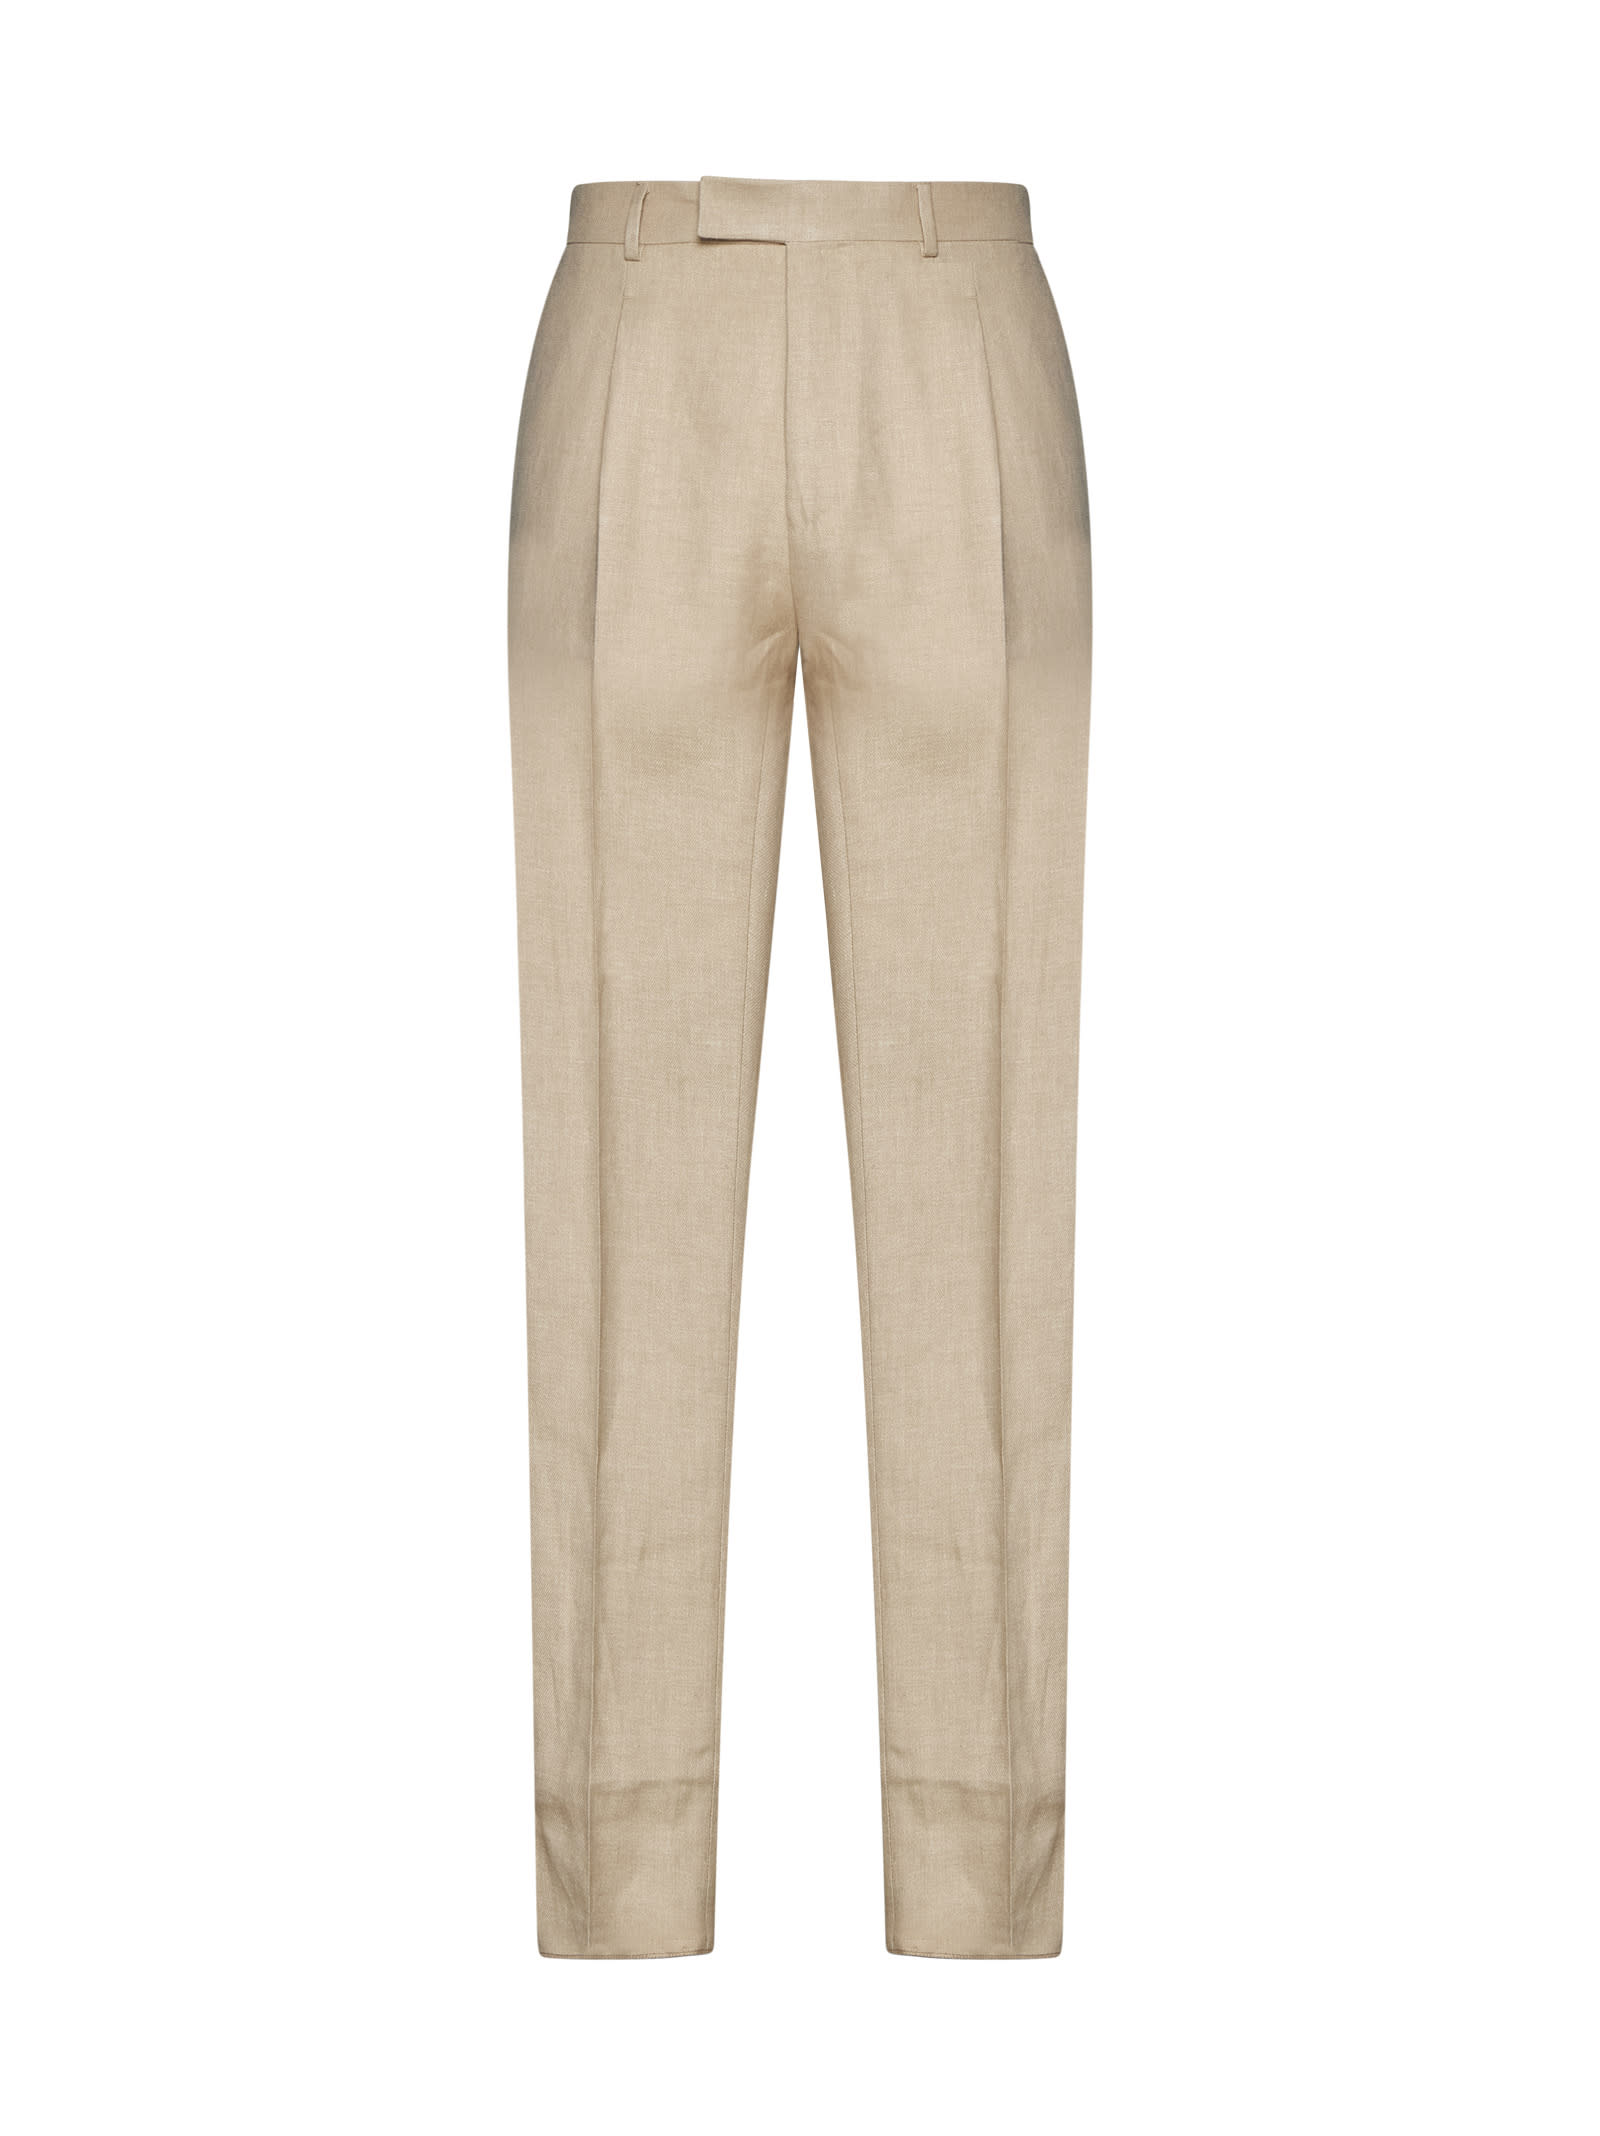 Zegna Pants In Neutral